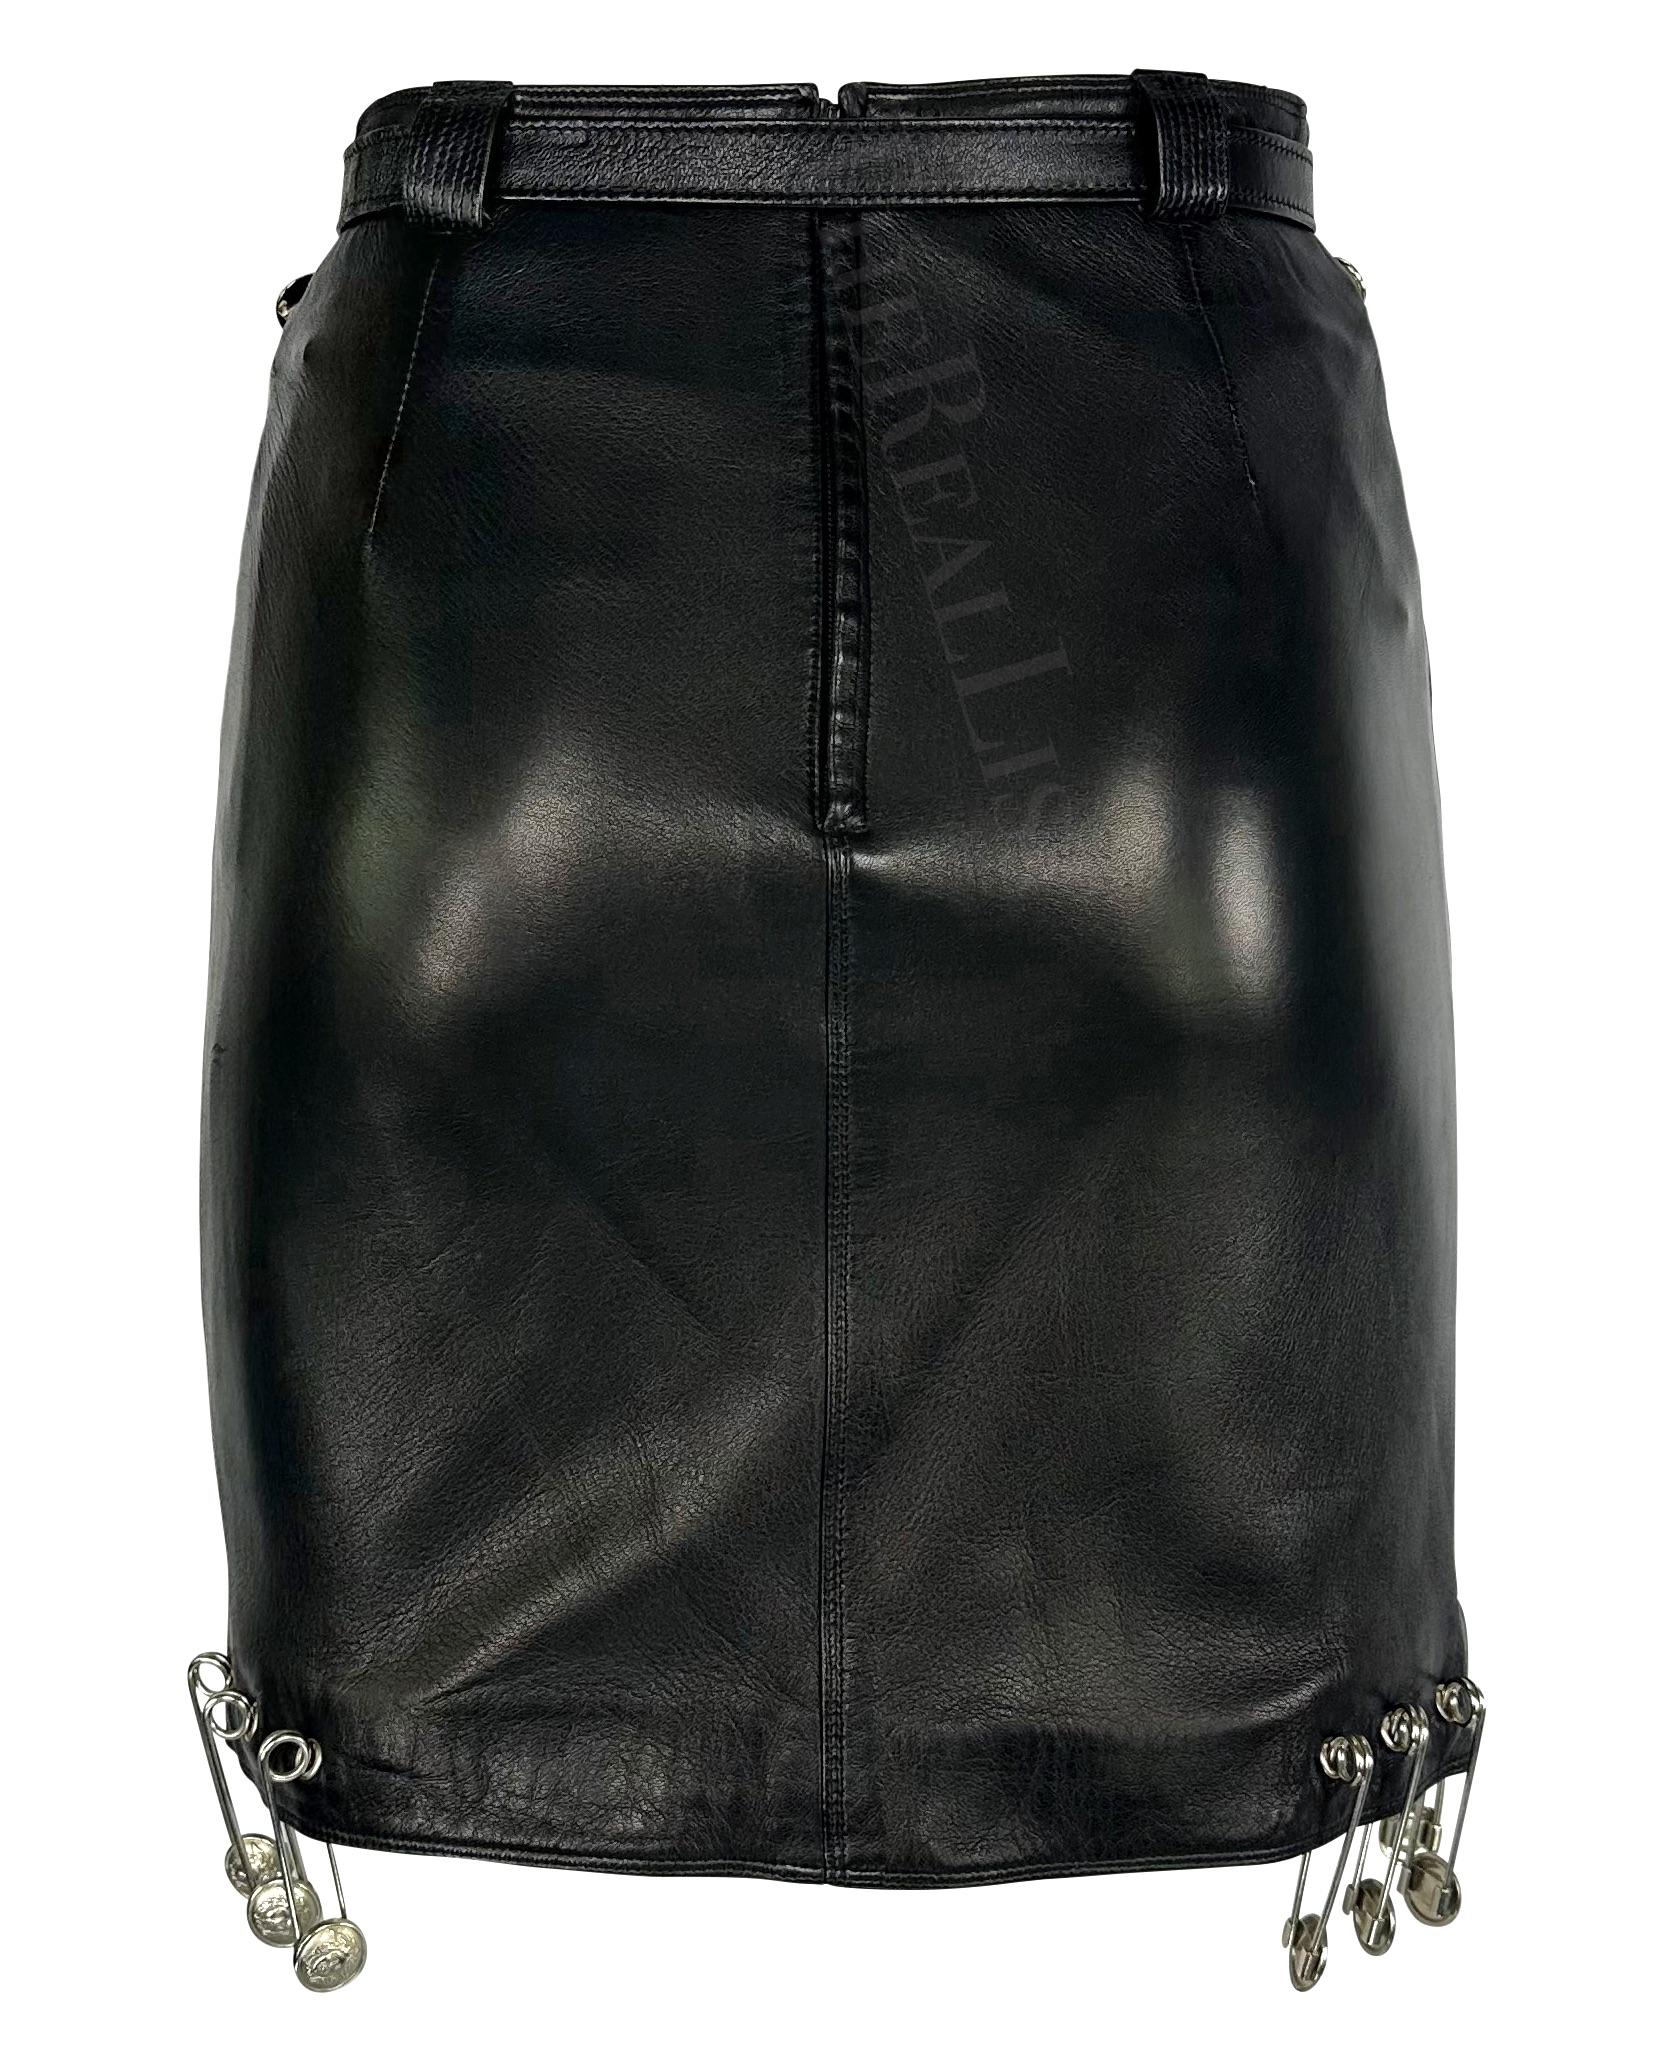 S/S 1994 Gianni Versace Safety Pin Medusa Pierced Black Leather Belted Skirt For Sale 6